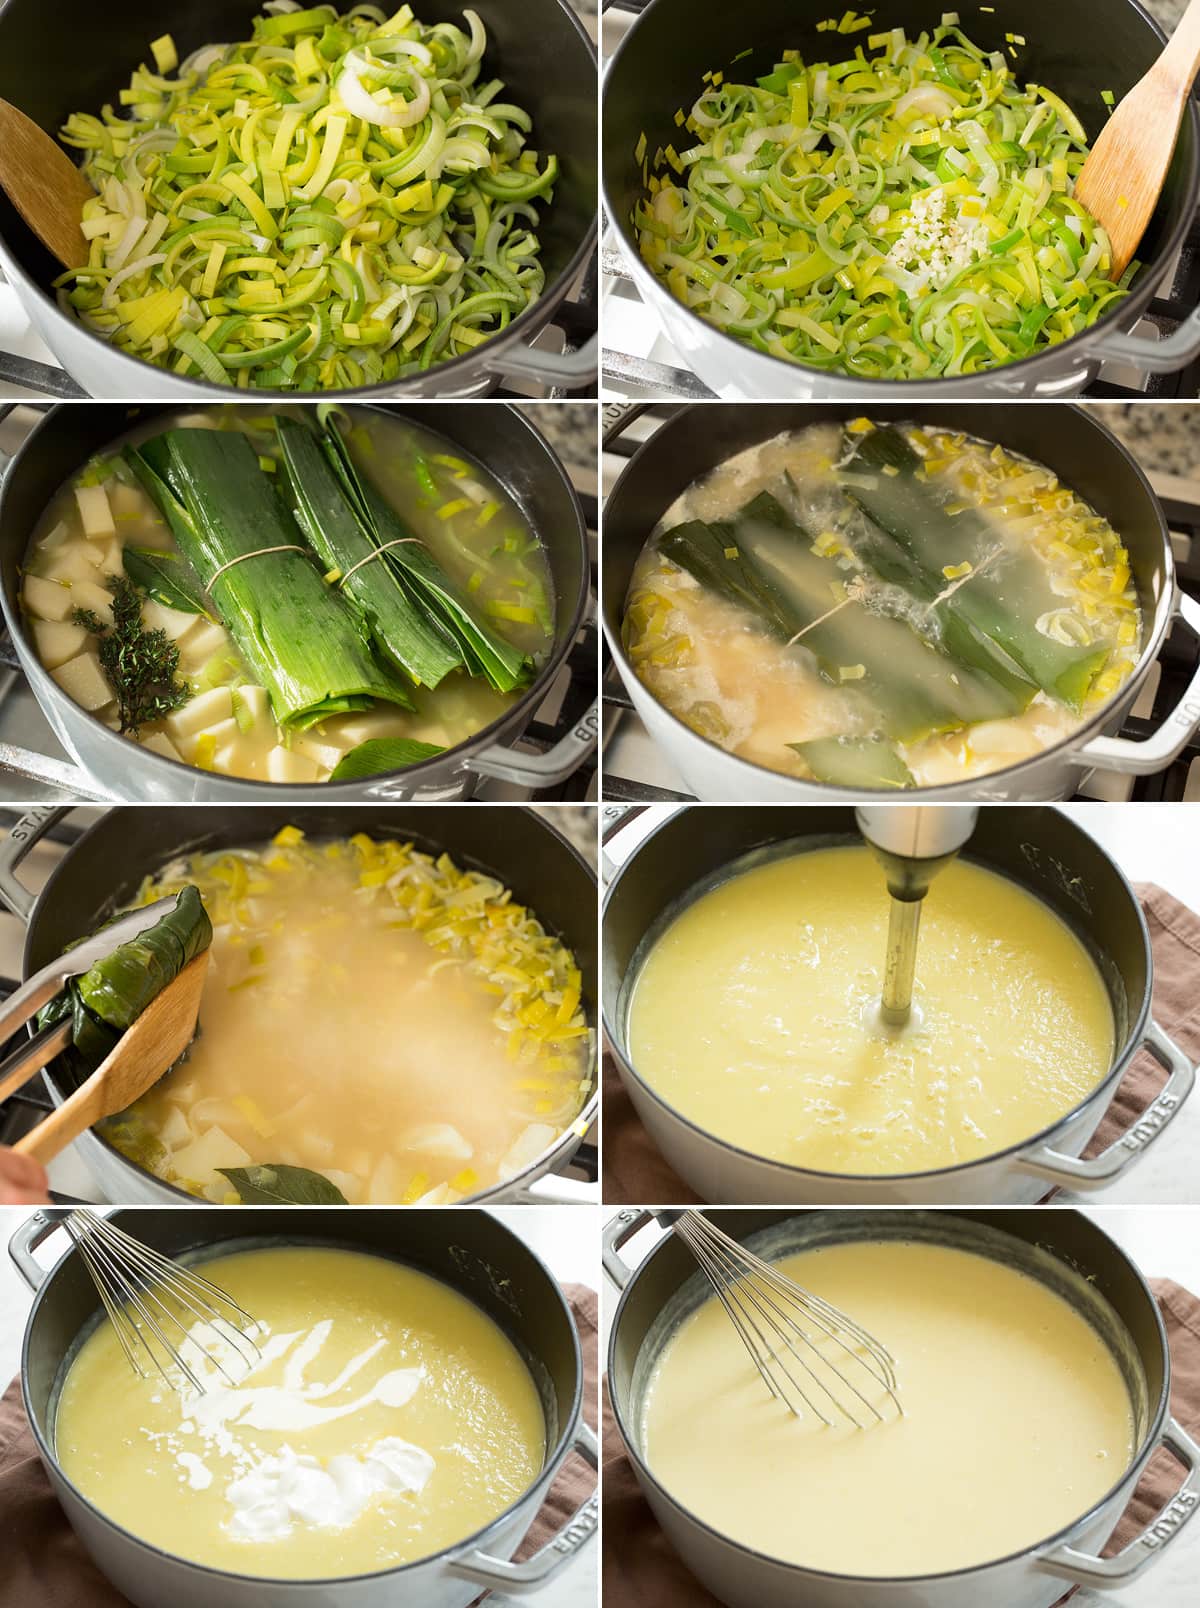 Collage of eight images showing steps of making potato leek soup in a pot on the stovetop.